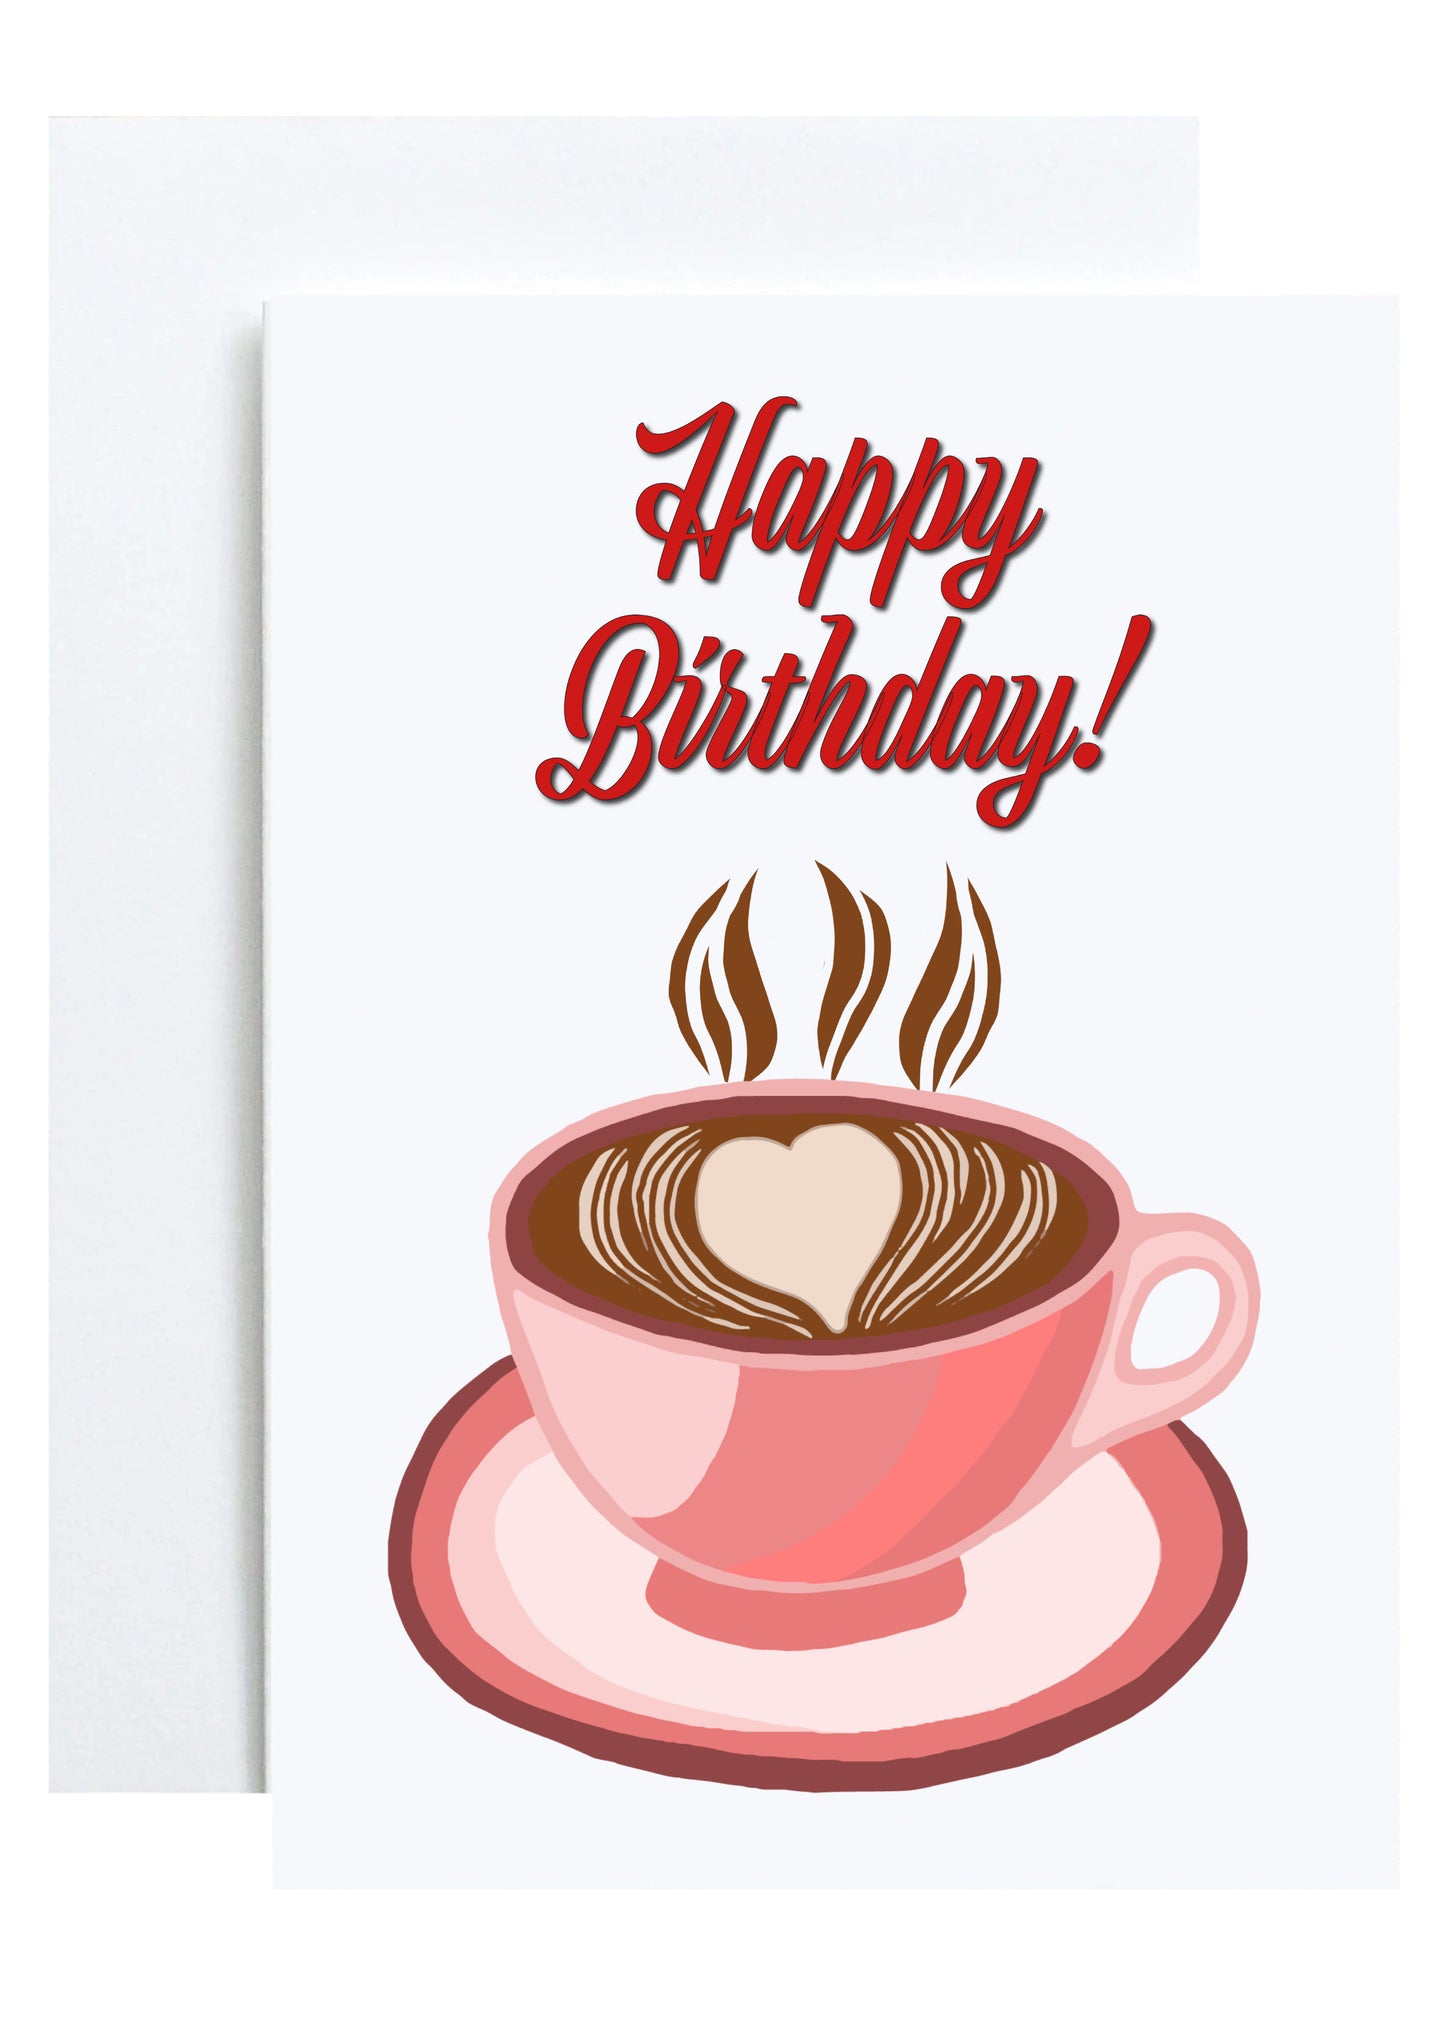 "I Love You a Whole Latte" Greeting Card (Birthday)